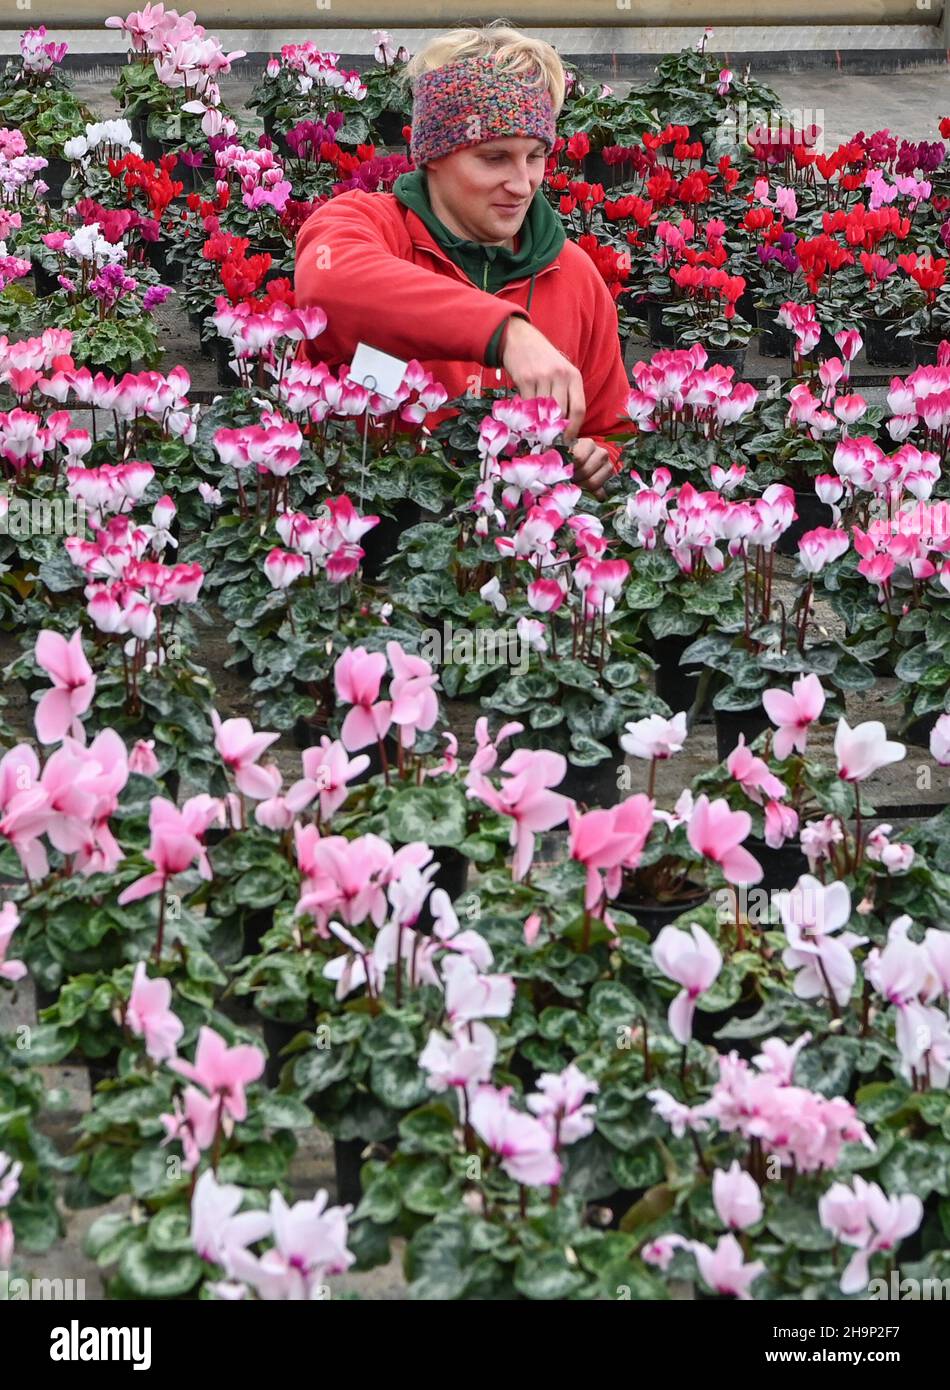 07 December 2021, Brandenburg, Schöneiche: Gardener Markus Lehmann examines the growth of the colourful cyclamen, which are currently on sale at the Flora-Land Arnold nursery for the Christmas season. The seasonal produce is grown here in the nursery's own greenhouses, brought into bloom and sold on site. Photo: Jens Kalaene/dpa-Zentralbild/ZB Stock Photo